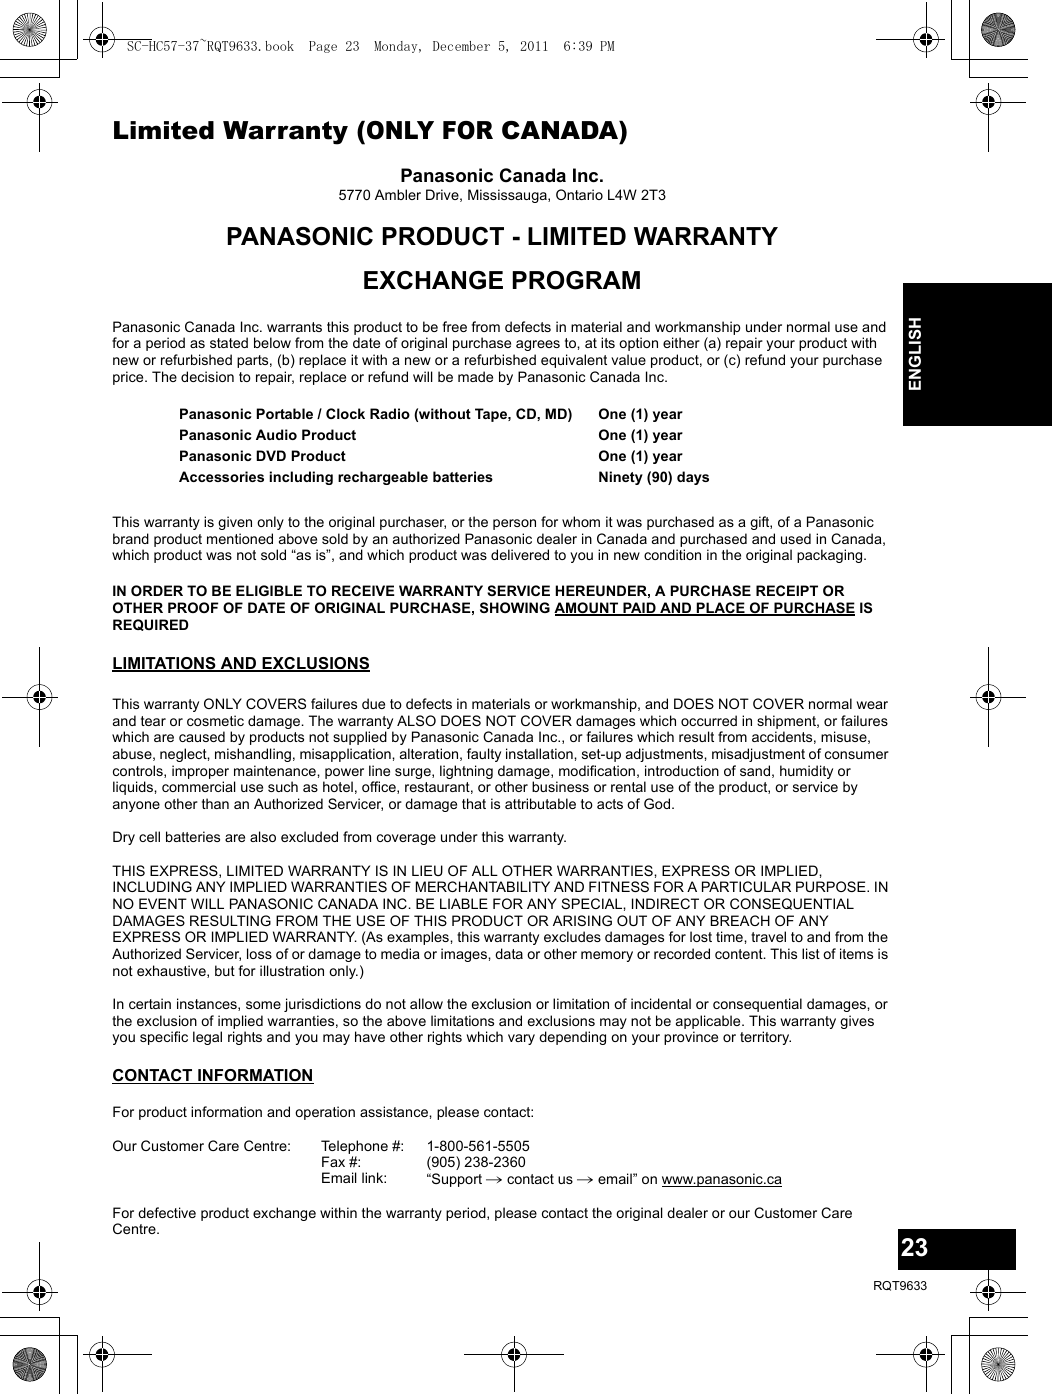 23RQT9633ENGLISHLimited Warranty (ONLY FOR CANADA)Panasonic Canada Inc.5770 Ambler Drive, Mississauga, Ontario L4W 2T3PANASONIC PRODUCT - LIMITED WARRANTYEXCHANGE PROGRAMPanasonic Canada Inc. warrants this product to be free from defects in material and workmanship under normal use and for a period as stated below from the date of original purchase agrees to, at its option either (a) repair your product with new or refurbished parts, (b) replace it with a new or a refurbished equivalent value product, or (c) refund your purchase price. The decision to repair, replace or refund will be made by Panasonic Canada Inc.This warranty is given only to the original purchaser, or the person for whom it was purchased as a gift, of a Panasonic brand product mentioned above sold by an authorized Panasonic dealer in Canada and purchased and used in Canada, which product was not sold “as is”, and which product was delivered to you in new condition in the original packaging.IN ORDER TO BE ELIGIBLE TO RECEIVE WARRANTY SERVICE HEREUNDER, A PURCHASE RECEIPT OR OTHER PROOF OF DATE OF ORIGINAL PURCHASE, SHOWING AMOUNT PAID AND PLACE OF PURCHASE IS REQUIRED LIMITATIONS AND EXCLUSIONSThis warranty ONLY COVERS failures due to defects in materials or workmanship, and DOES NOT COVER normal wear and tear or cosmetic damage. The warranty ALSO DOES NOT COVER damages which occurred in shipment, or failures which are caused by products not supplied by Panasonic Canada Inc., or failures which result from accidents, misuse, abuse, neglect, mishandling, misapplication, alteration, faulty installation, set-up adjustments, misadjustment of consumer controls, improper maintenance, power line surge, lightning damage, modification, introduction of sand, humidity or liquids, commercial use such as hotel, office, restaurant, or other business or rental use of the product, or service by anyone other than an Authorized Servicer, or damage that is attributable to acts of God.Dry cell batteries are also excluded from coverage under this warranty.THIS EXPRESS, LIMITED WARRANTY IS IN LIEU OF ALL OTHER WARRANTIES, EXPRESS OR IMPLIED, INCLUDING ANY IMPLIED WARRANTIES OF MERCHANTABILITY AND FITNESS FOR A PARTICULAR PURPOSE. IN NO EVENT WILL PANASONIC CANADA INC. BE LIABLE FOR ANY SPECIAL, INDIRECT OR CONSEQUENTIAL DAMAGES RESULTING FROM THE USE OF THIS PRODUCT OR ARISING OUT OF ANY BREACH OF ANY EXPRESS OR IMPLIED WARRANTY. (As examples, this warranty excludes damages for lost time, travel to and from the Authorized Servicer, loss of or damage to media or images, data or other memory or recorded content. This list of items is not exhaustive, but for illustration only.)In certain instances, some jurisdictions do not allow the exclusion or limitation of incidental or consequential damages, or the exclusion of implied warranties, so the above limitations and exclusions may not be applicable. This warranty gives you specific legal rights and you may have other rights which vary depending on your province or territory.CONTACT INFORMATIONPanasonic Portable / Clock Radio (without Tape, CD, MD)Panasonic Audio ProductPanasonic DVD ProductAccessories including rechargeable batteriesOne (1) yearOne (1) yearOne (1) yearNinety (90) daysFor product information and operation assistance, please contact:Our Customer Care Centre: Telephone #:Fax #:Email link:1-800-561-5505(905) 238-2360“Support # contact us # email” on www.panasonic.caFor defective product exchange within the warranty period, please contact the original dealer or our Customer Care Centre.SC-HC57-37~RQT9633.book  Page 23  Monday, December 5, 2011  6:39 PM